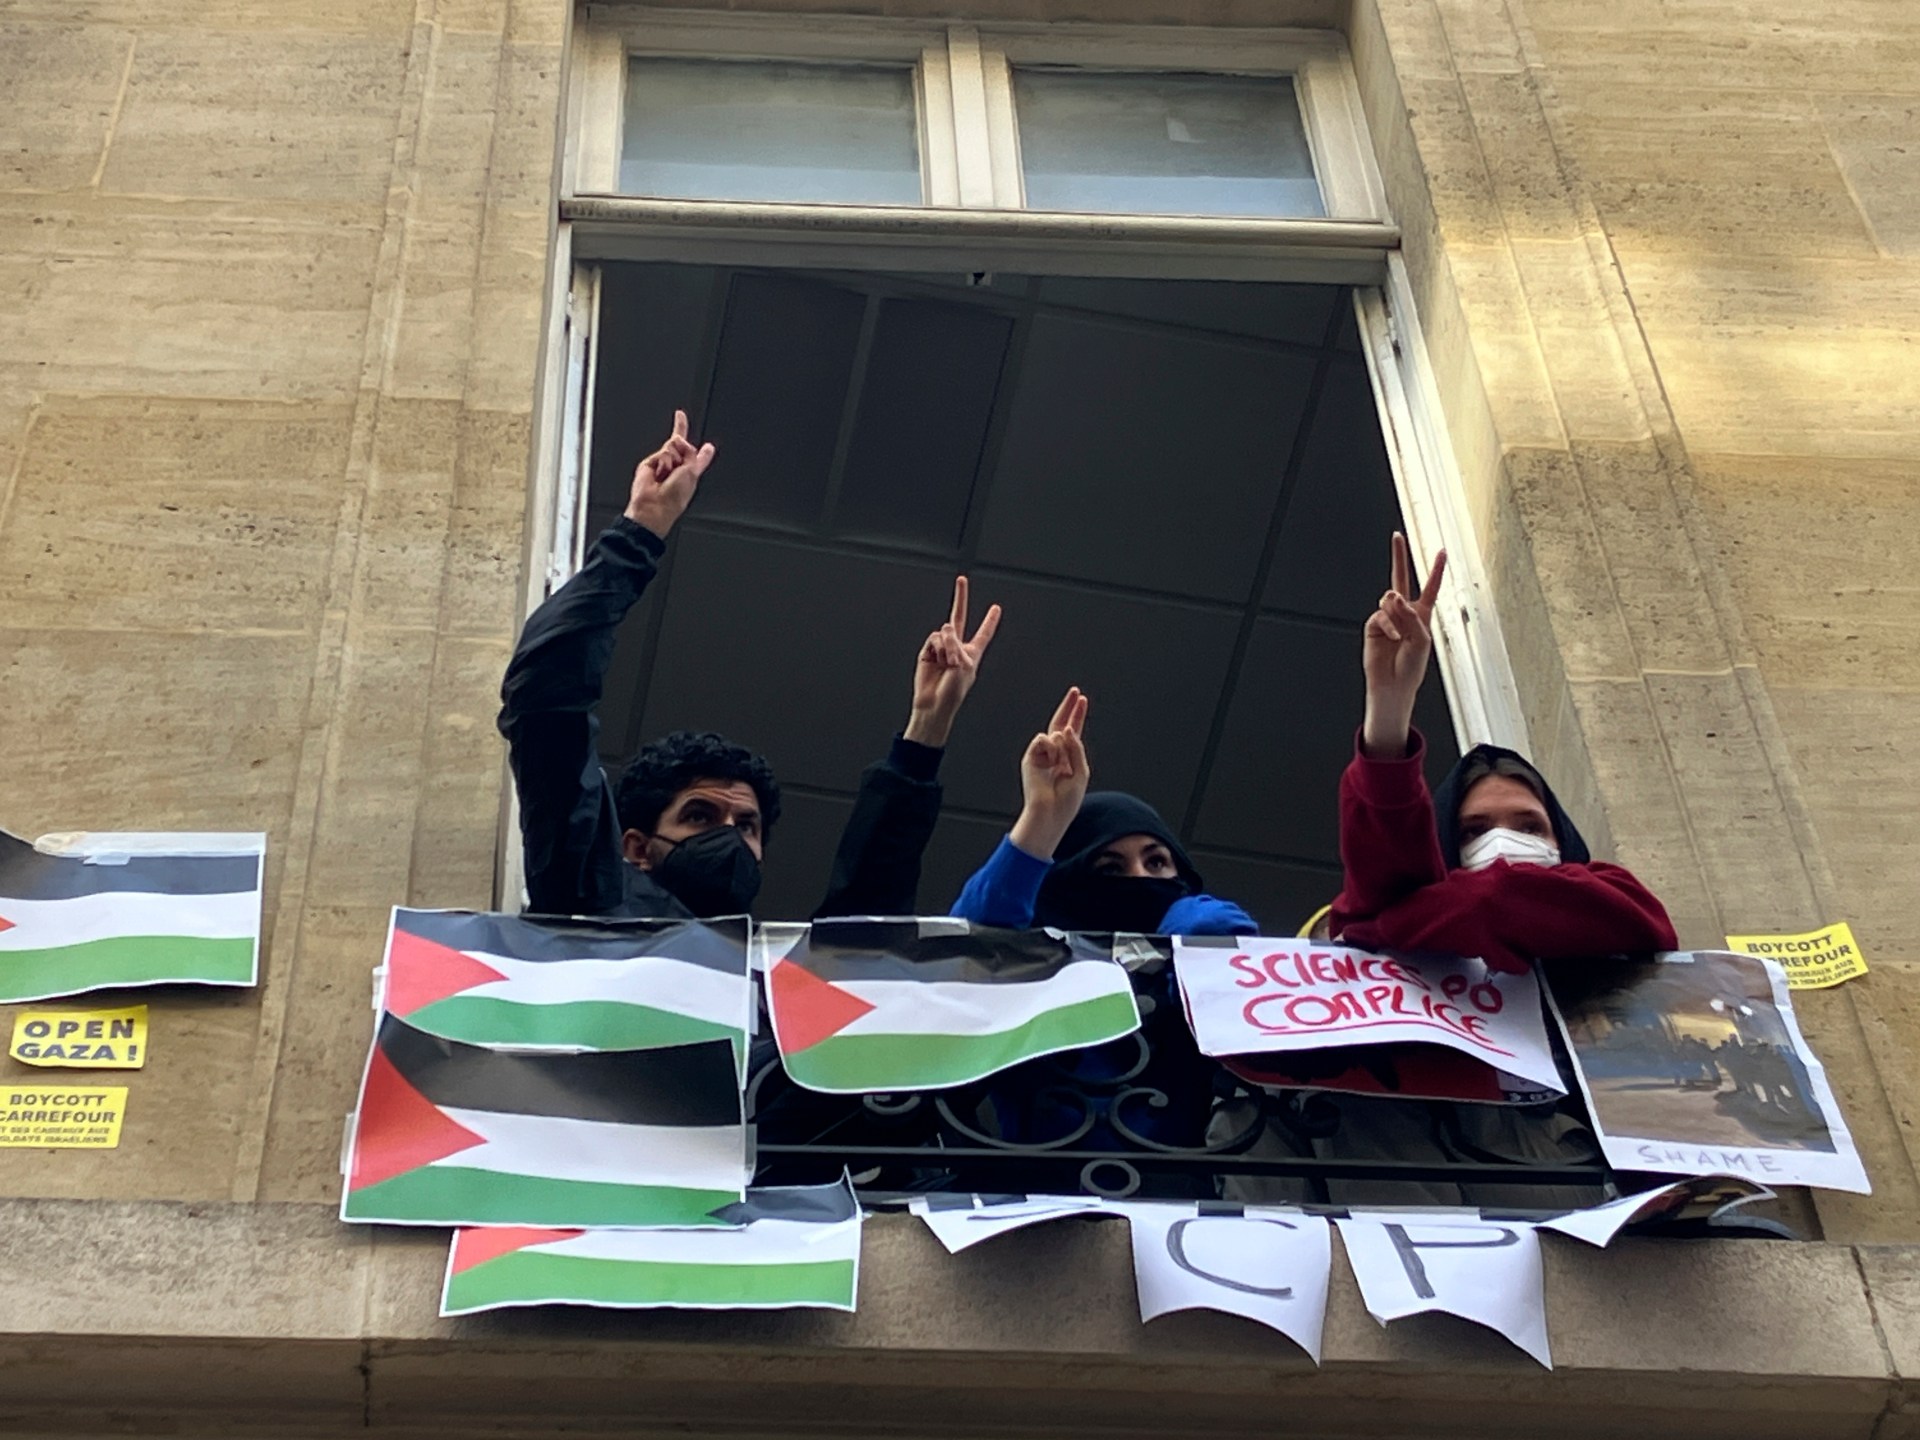 Protesting Students at Sciences Po in Paris Block Campus in Opposition to Israel’s Gaza Conflict